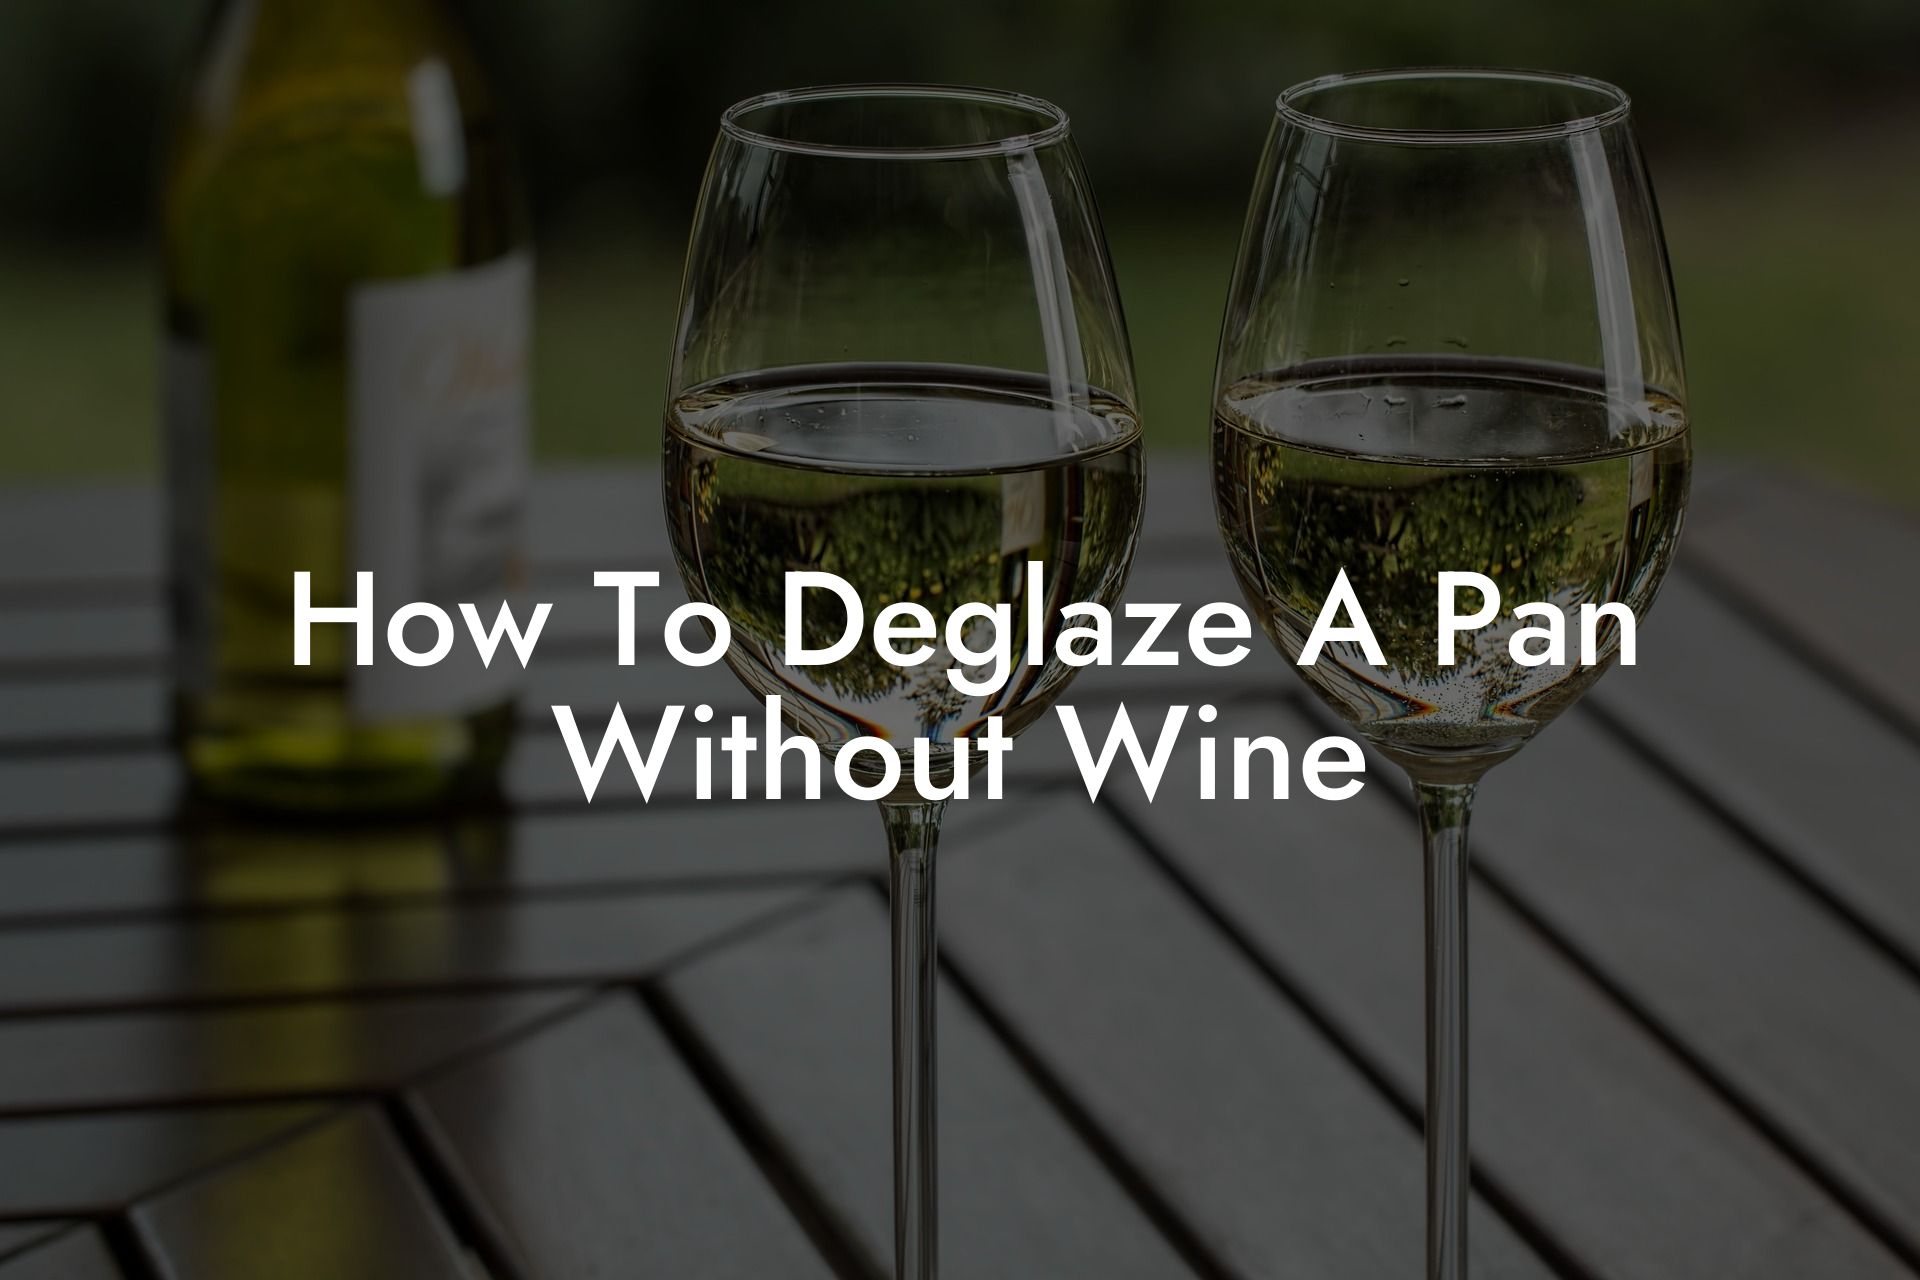 How To Deglaze A Pan Without Wine